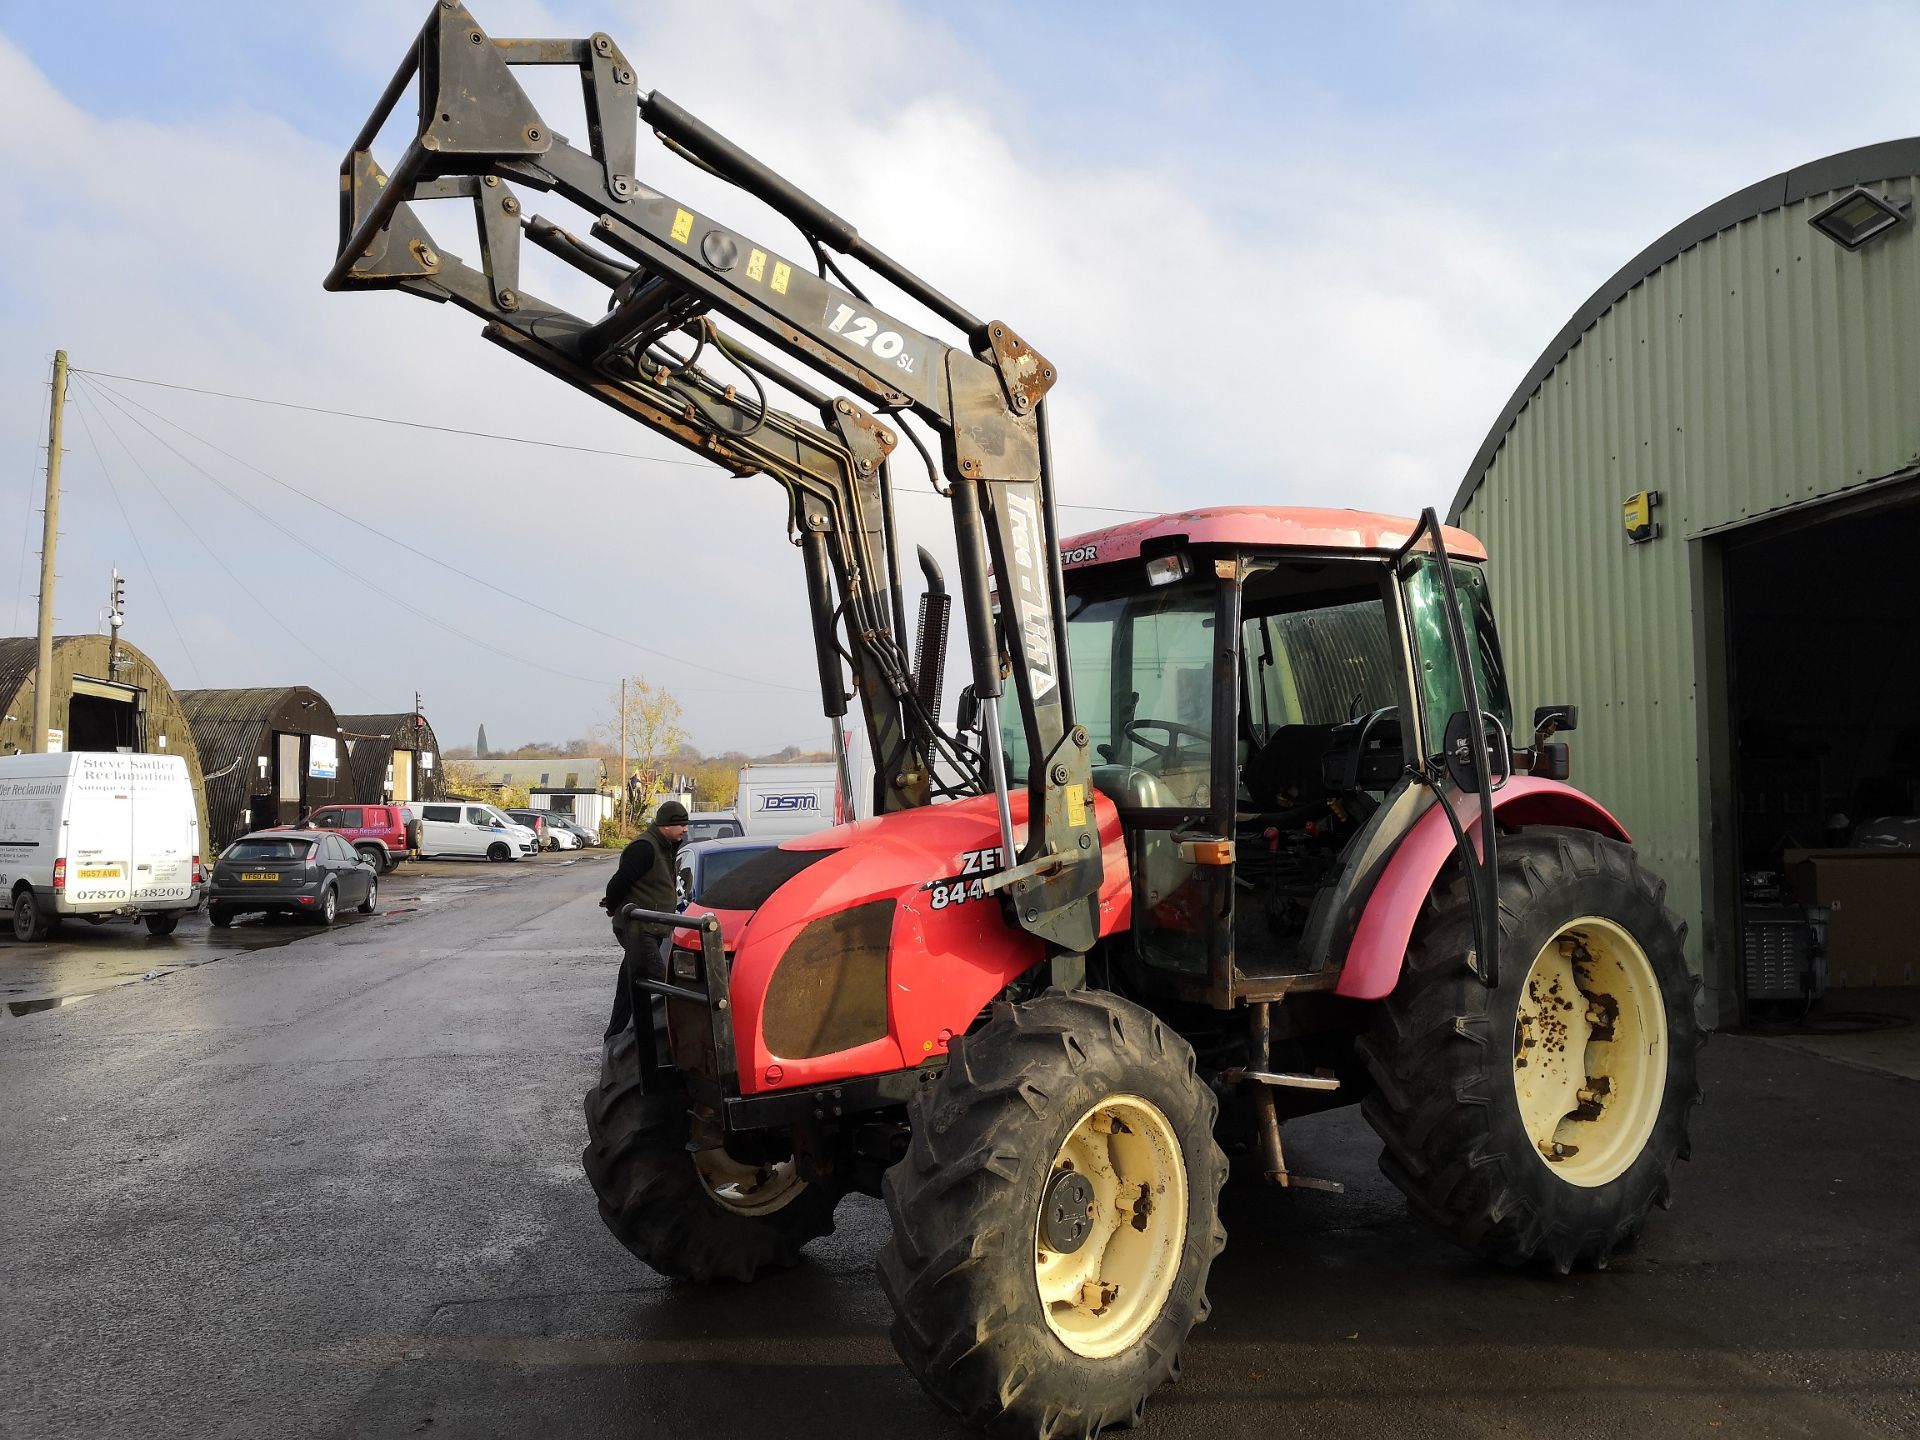 2005/05 REG ZETOR 8441 PROXIMA RED DIESEL TRACTOR WITH TRAC-LIFT 120 SL FRONT LOADER *NO VAT* - Image 3 of 18